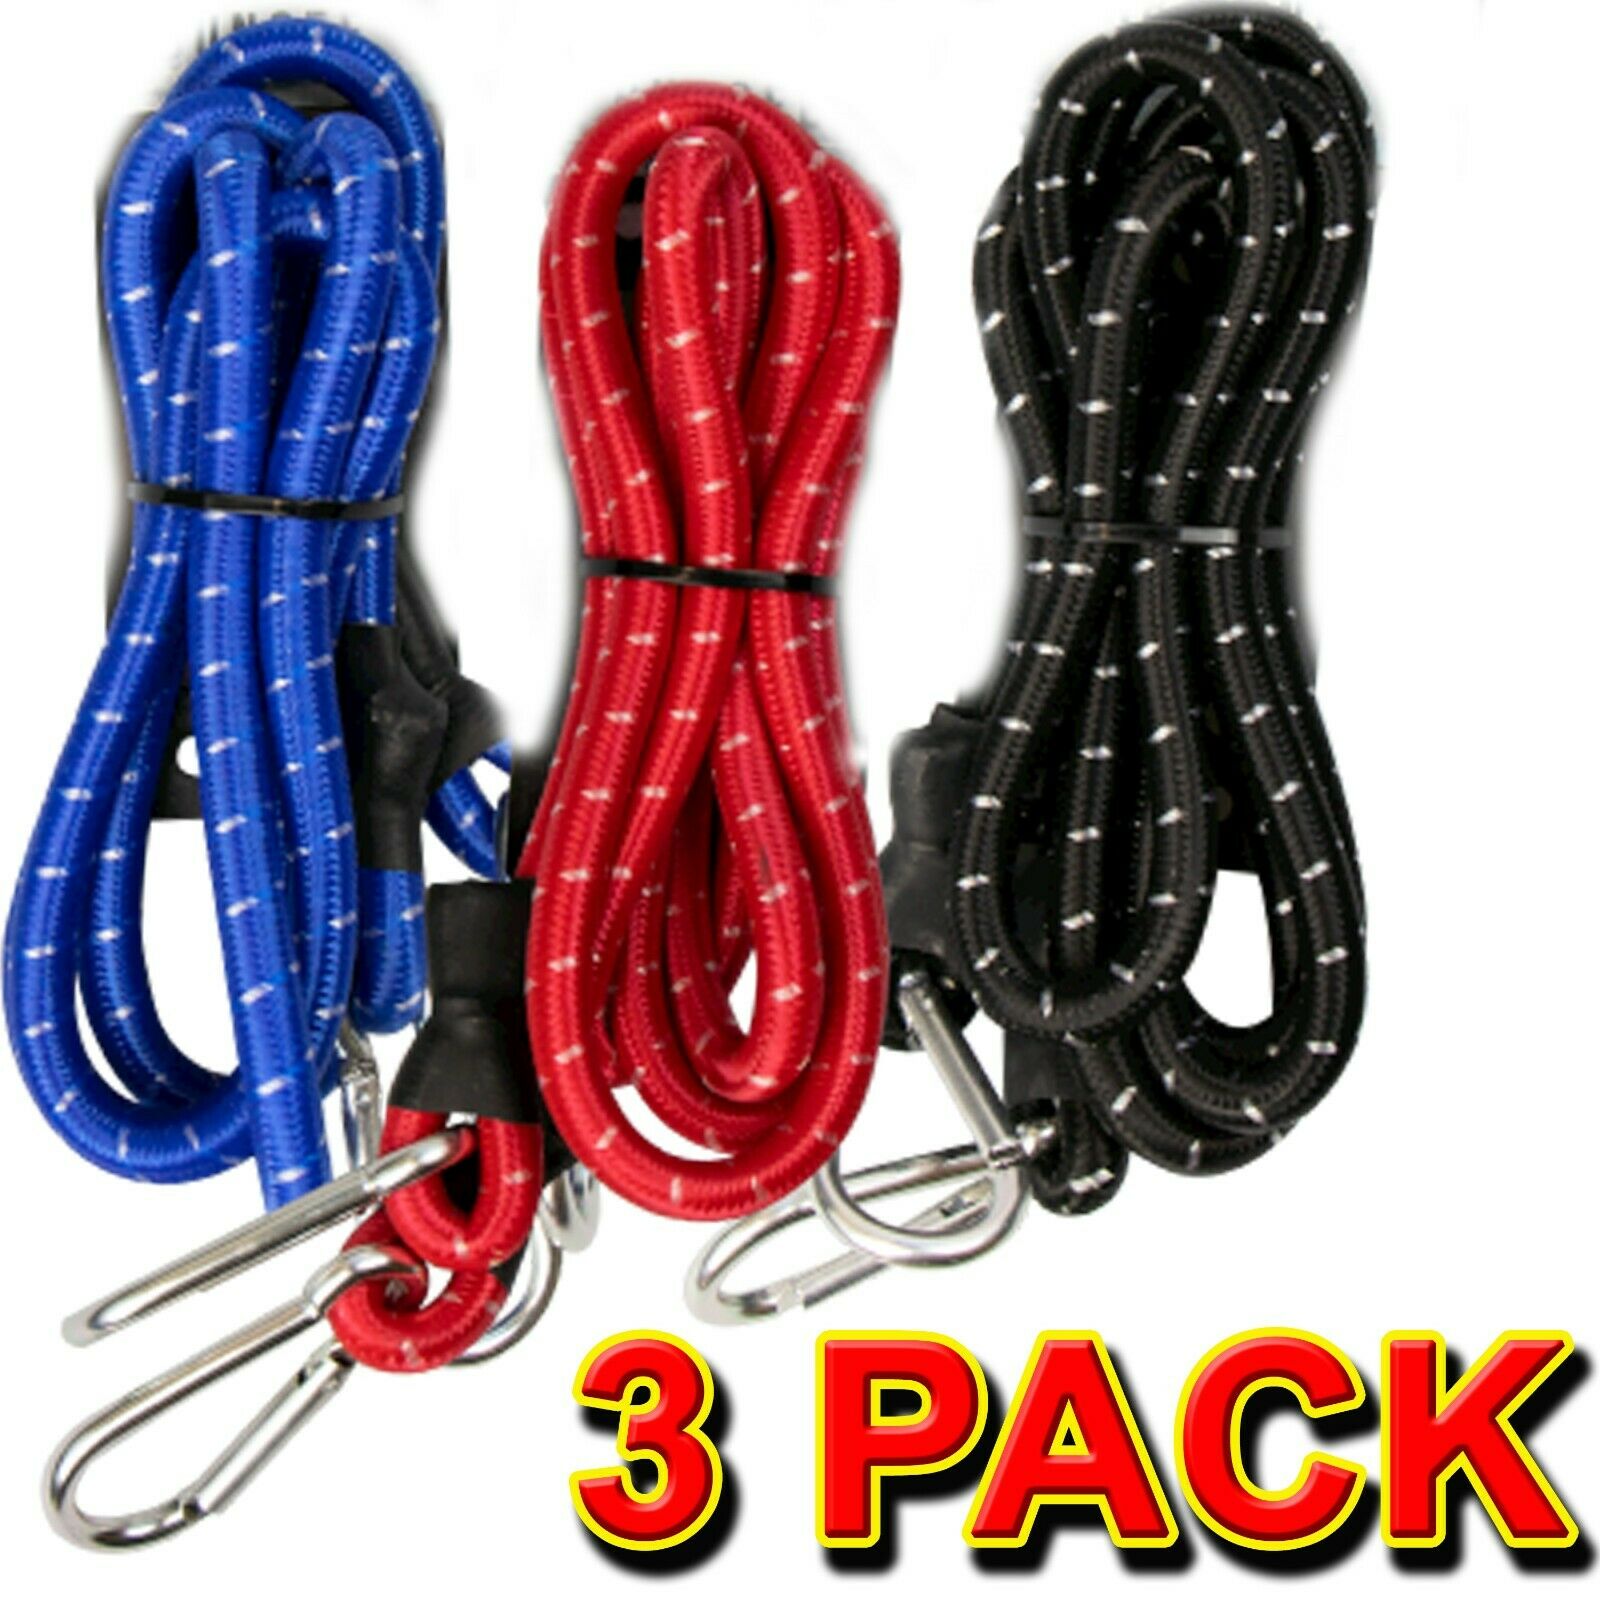 3 Pack 150cm Long Carabiner Bungee Cords Wires with Hooks Cables Strap